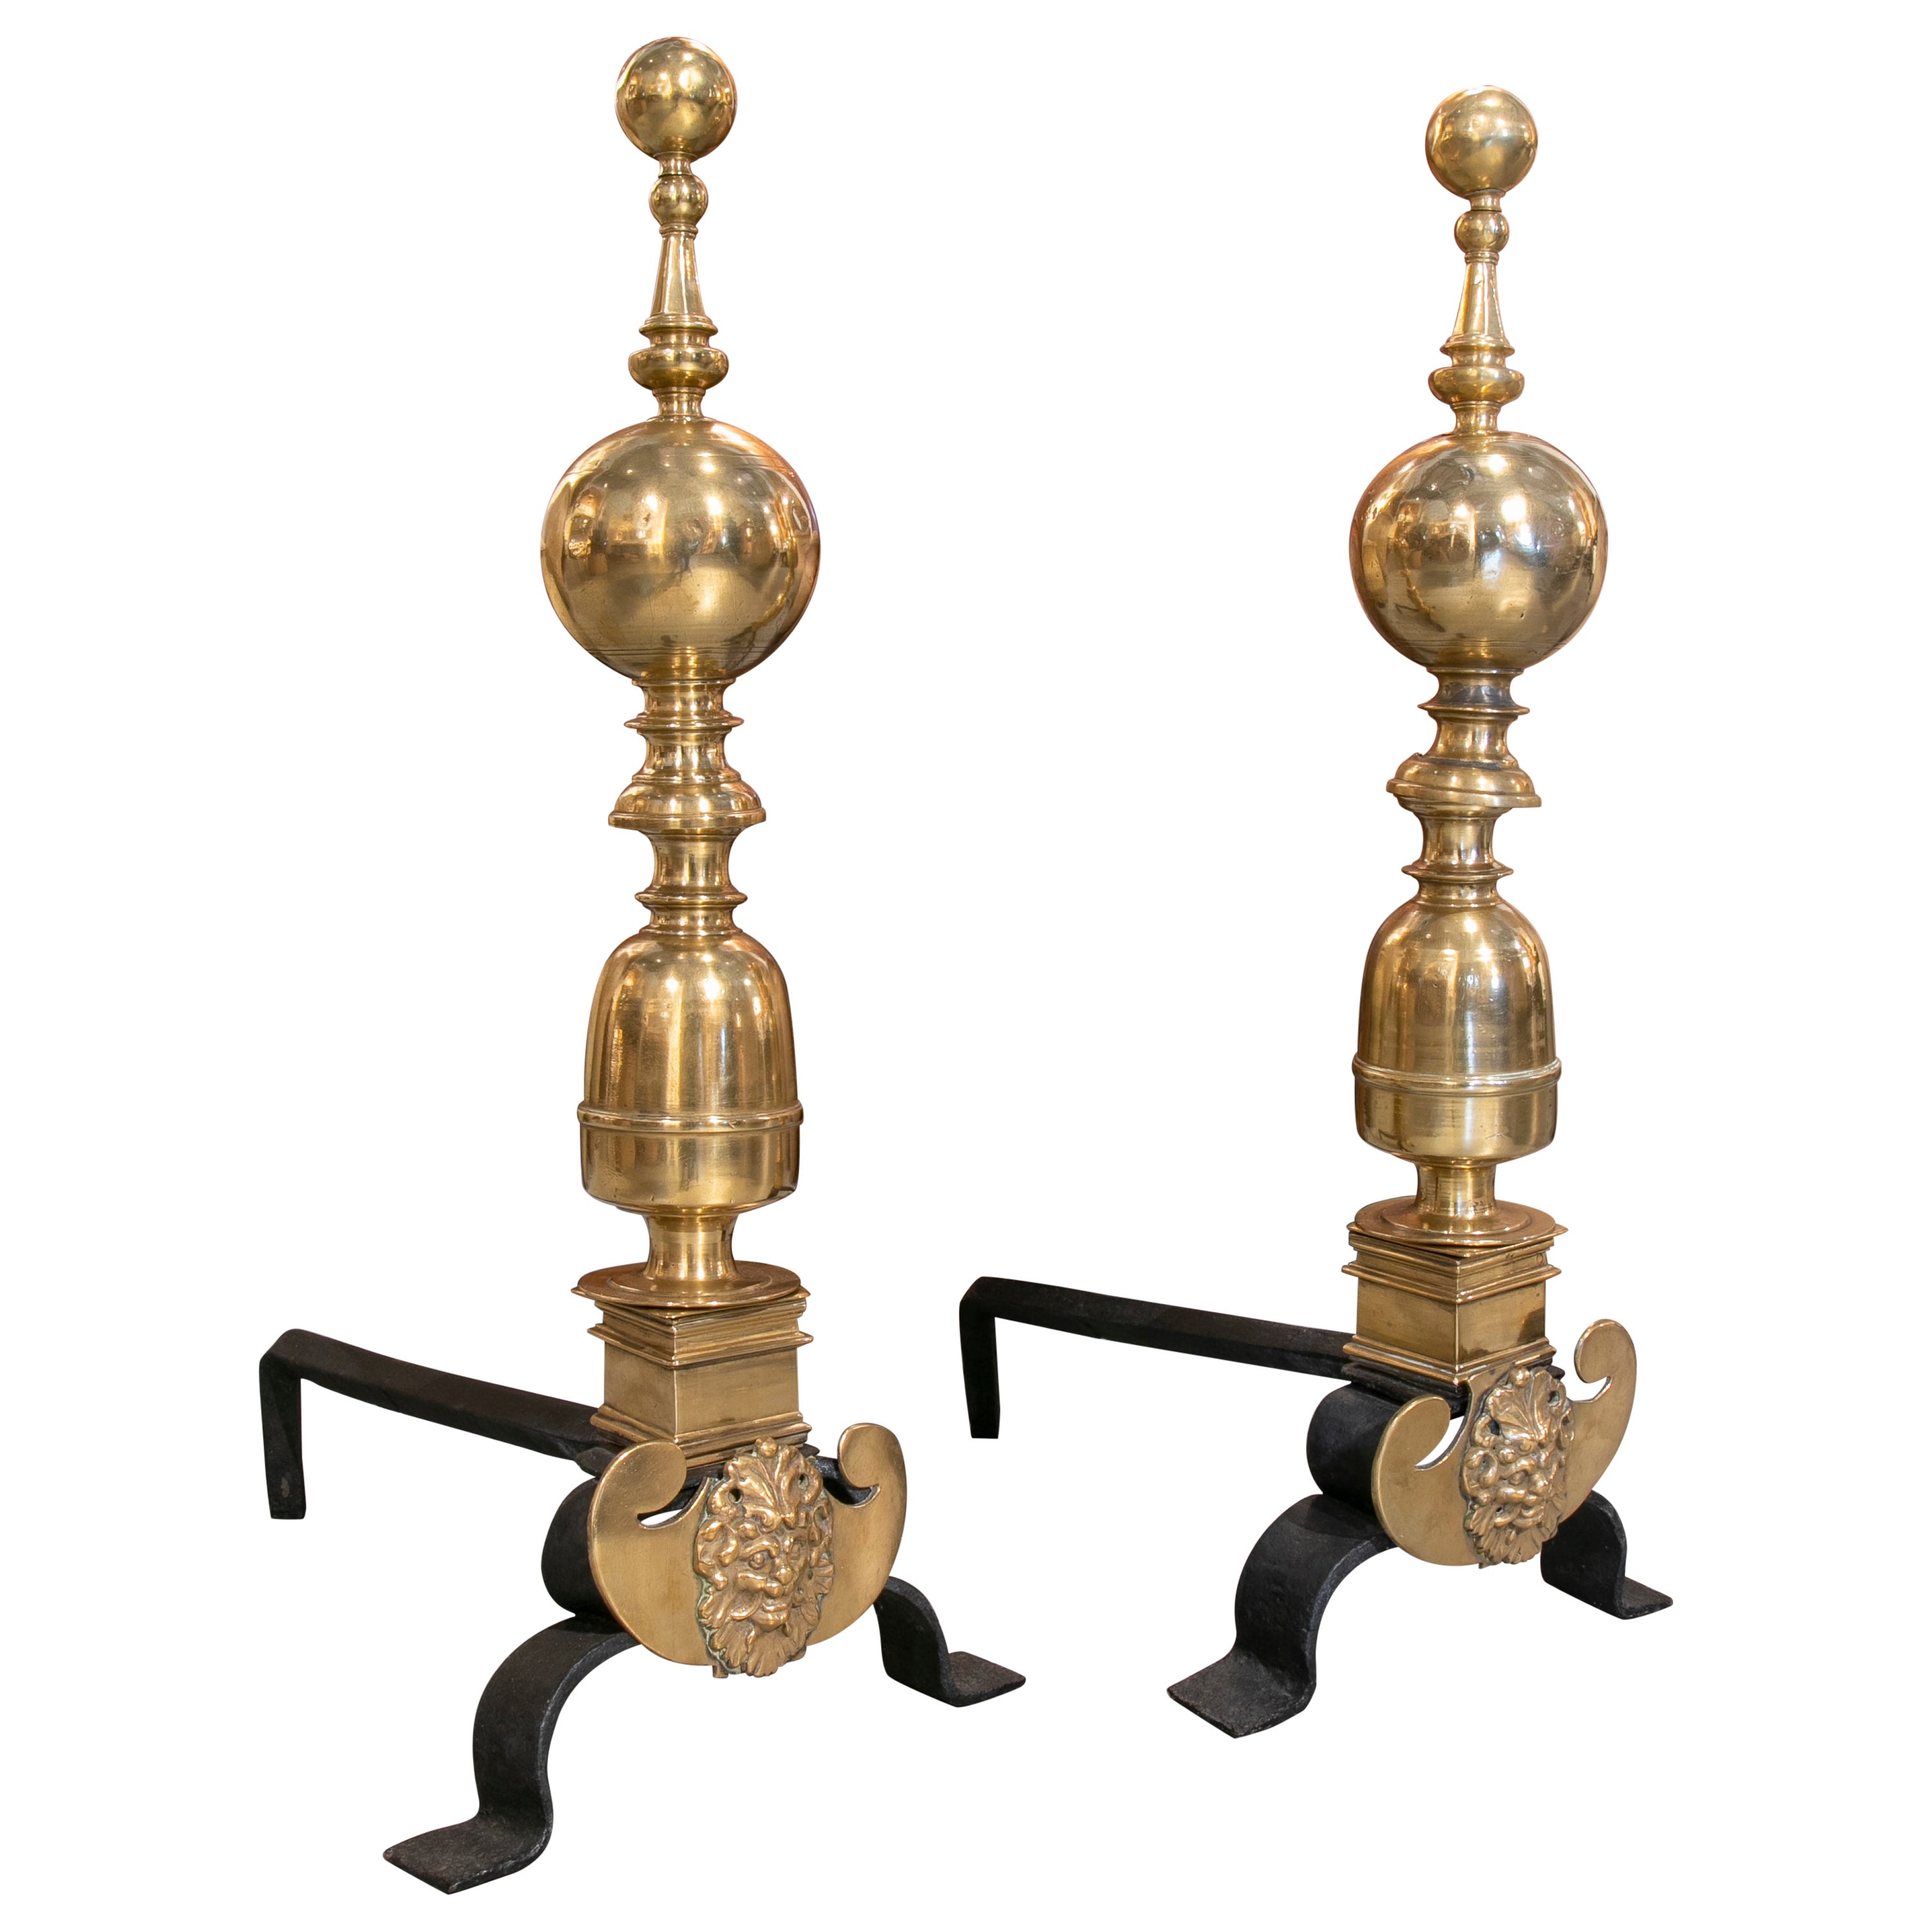 18th Century Pair of Gilded Bronze Moorings with Balls on Iron Feet